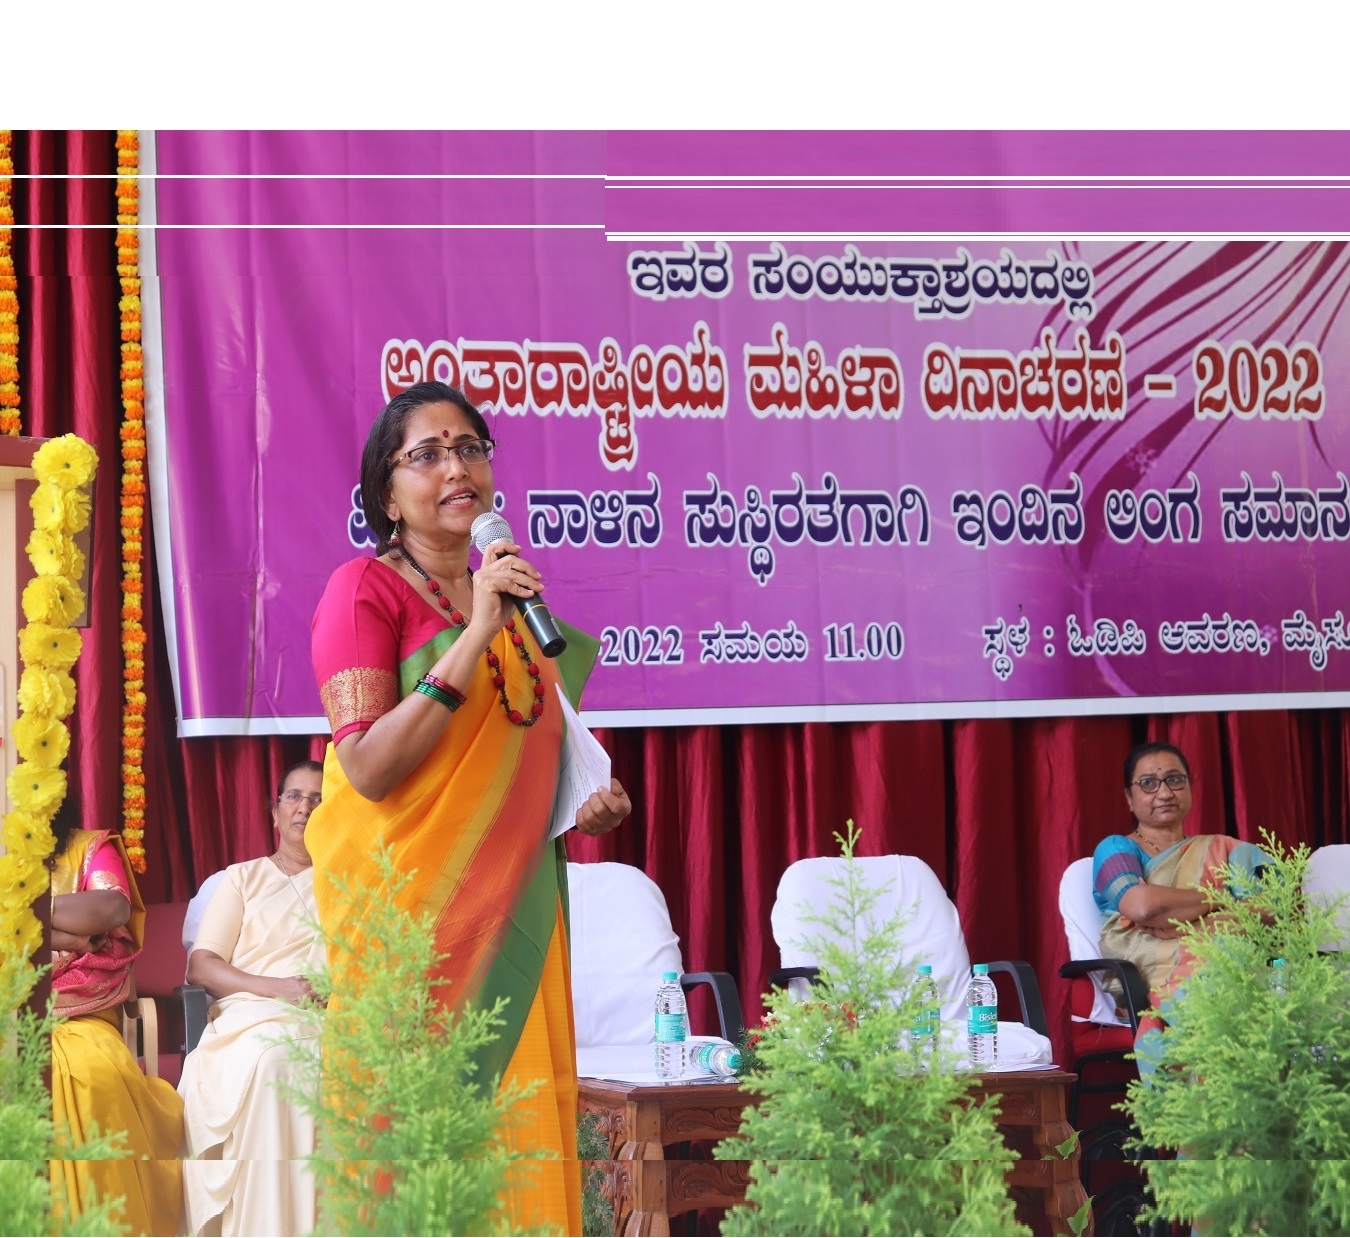 Dr. Meera- Asst. Professor - giving speech on - Gender equality today for a sustainable tomorrow